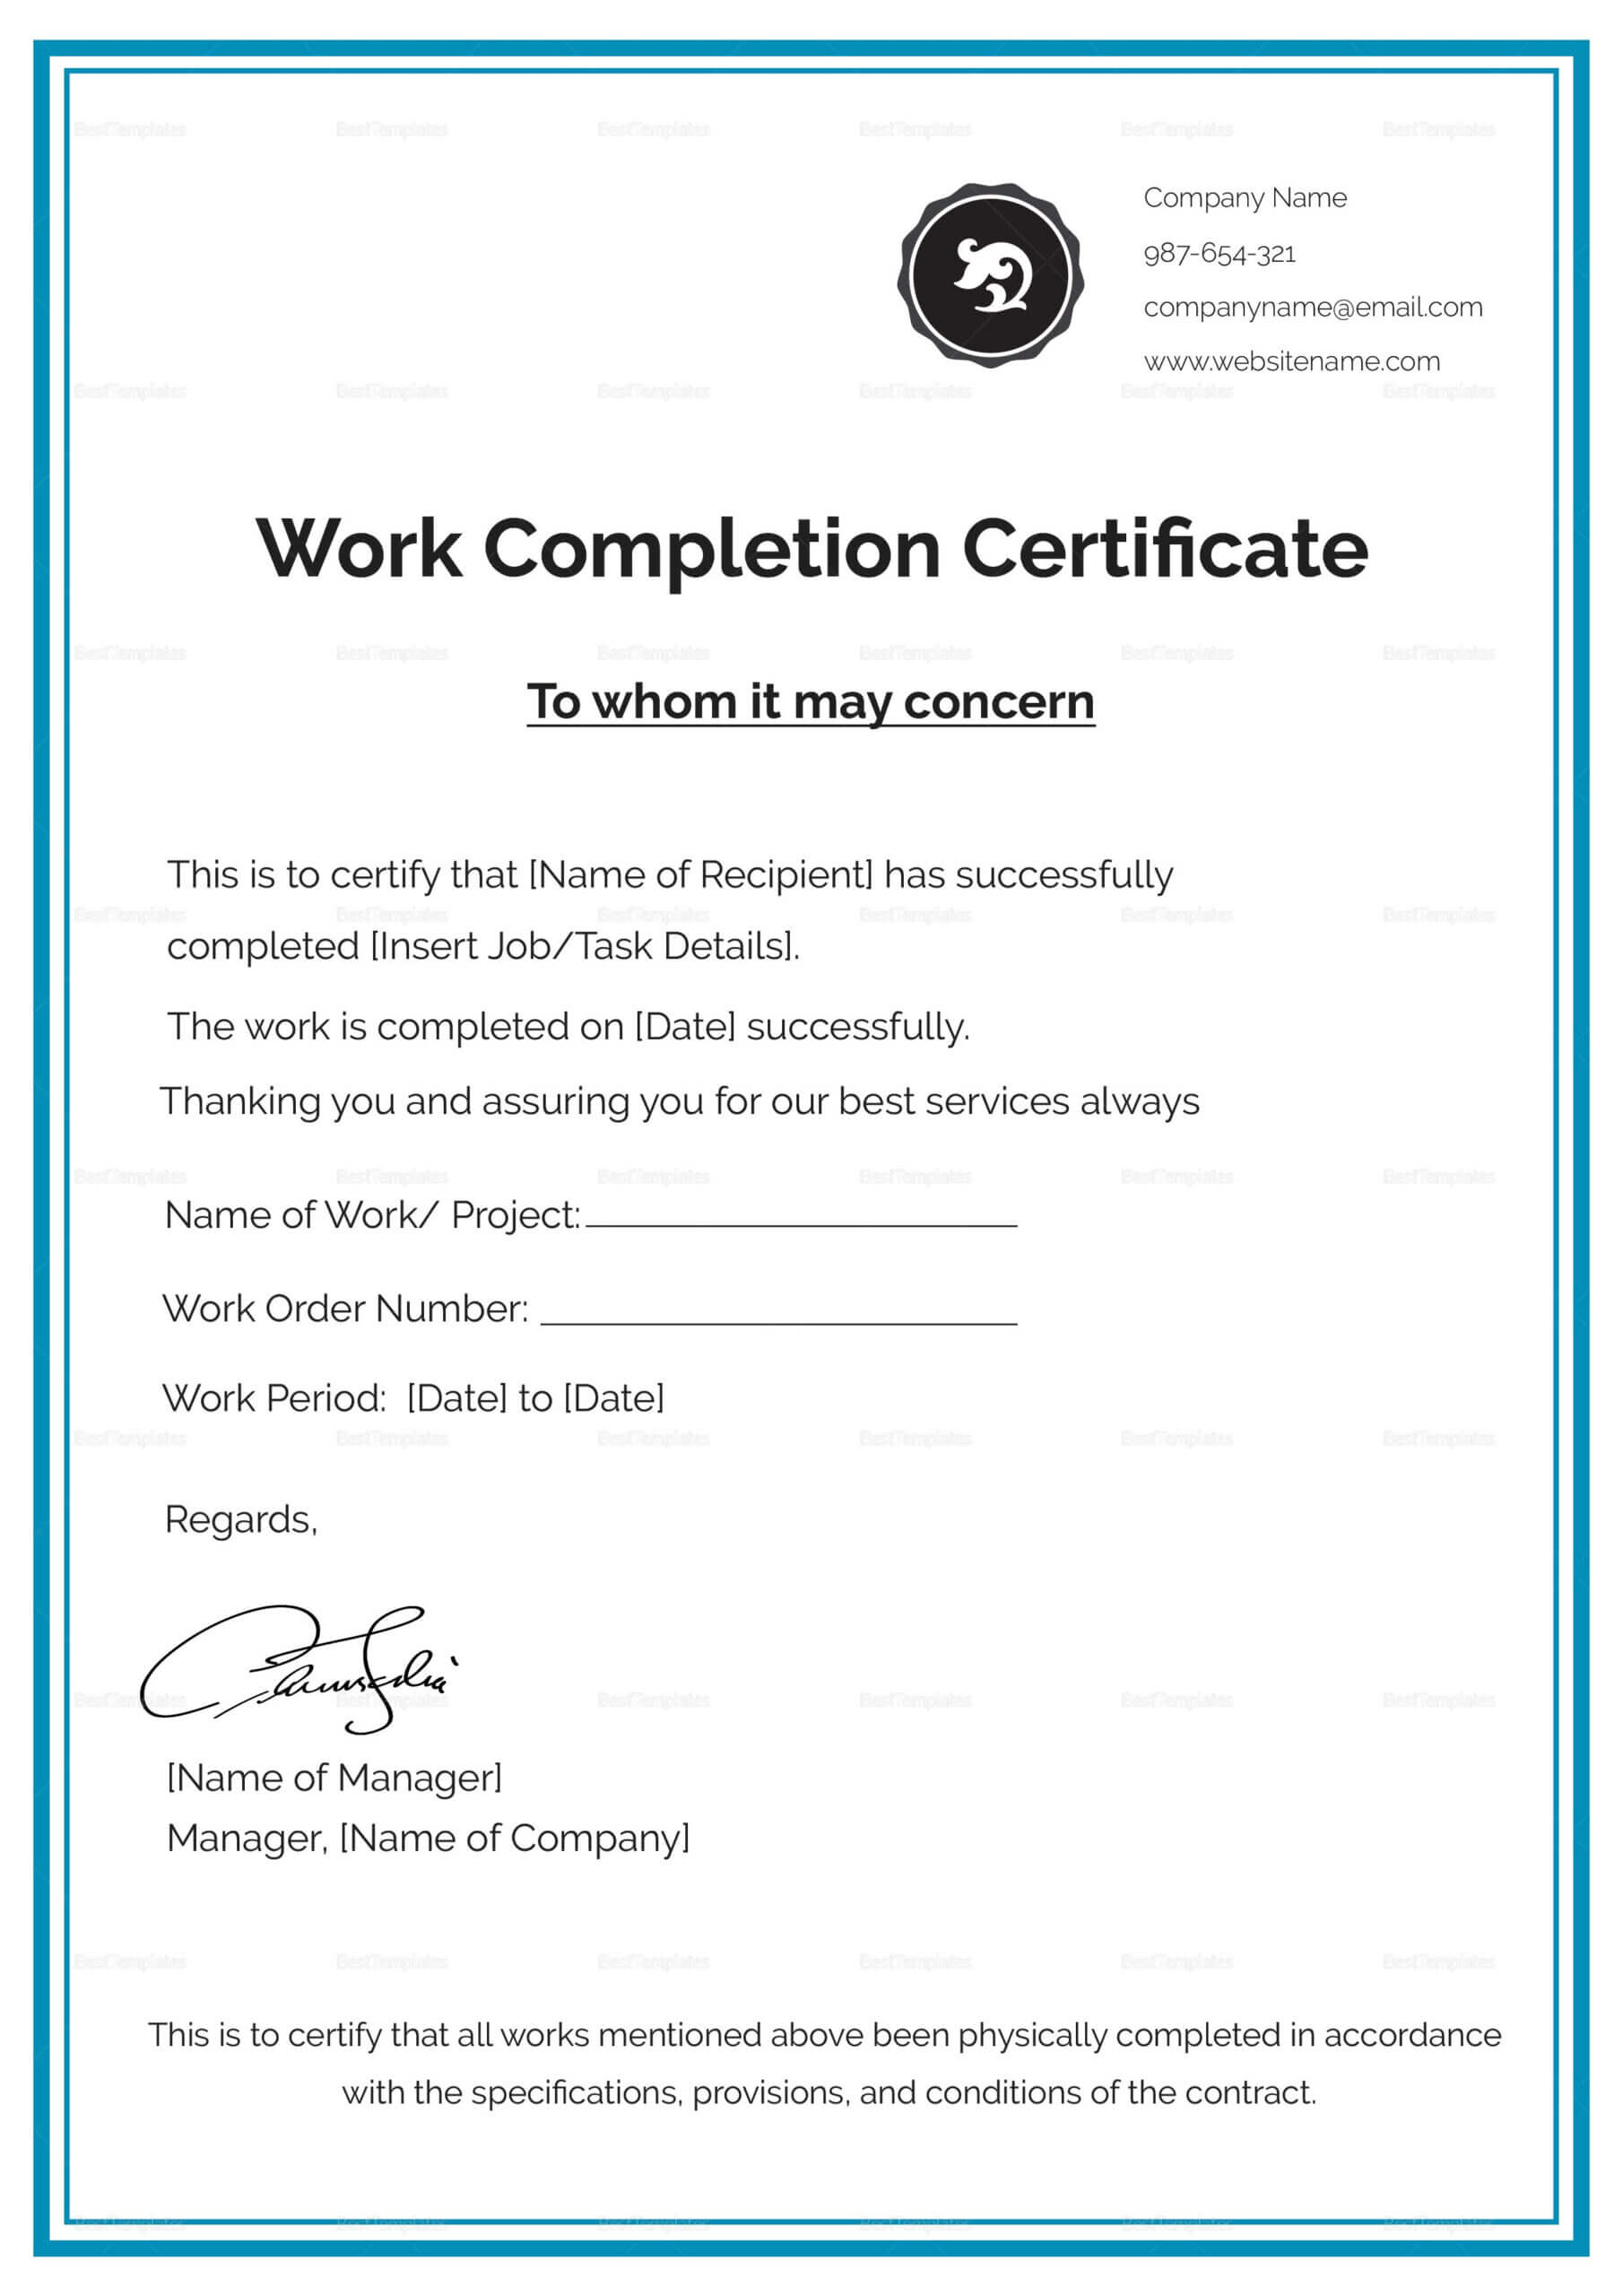 Work Completion Certificate Template In 2020 | Certificate Regarding Certificate Of Completion Template Construction